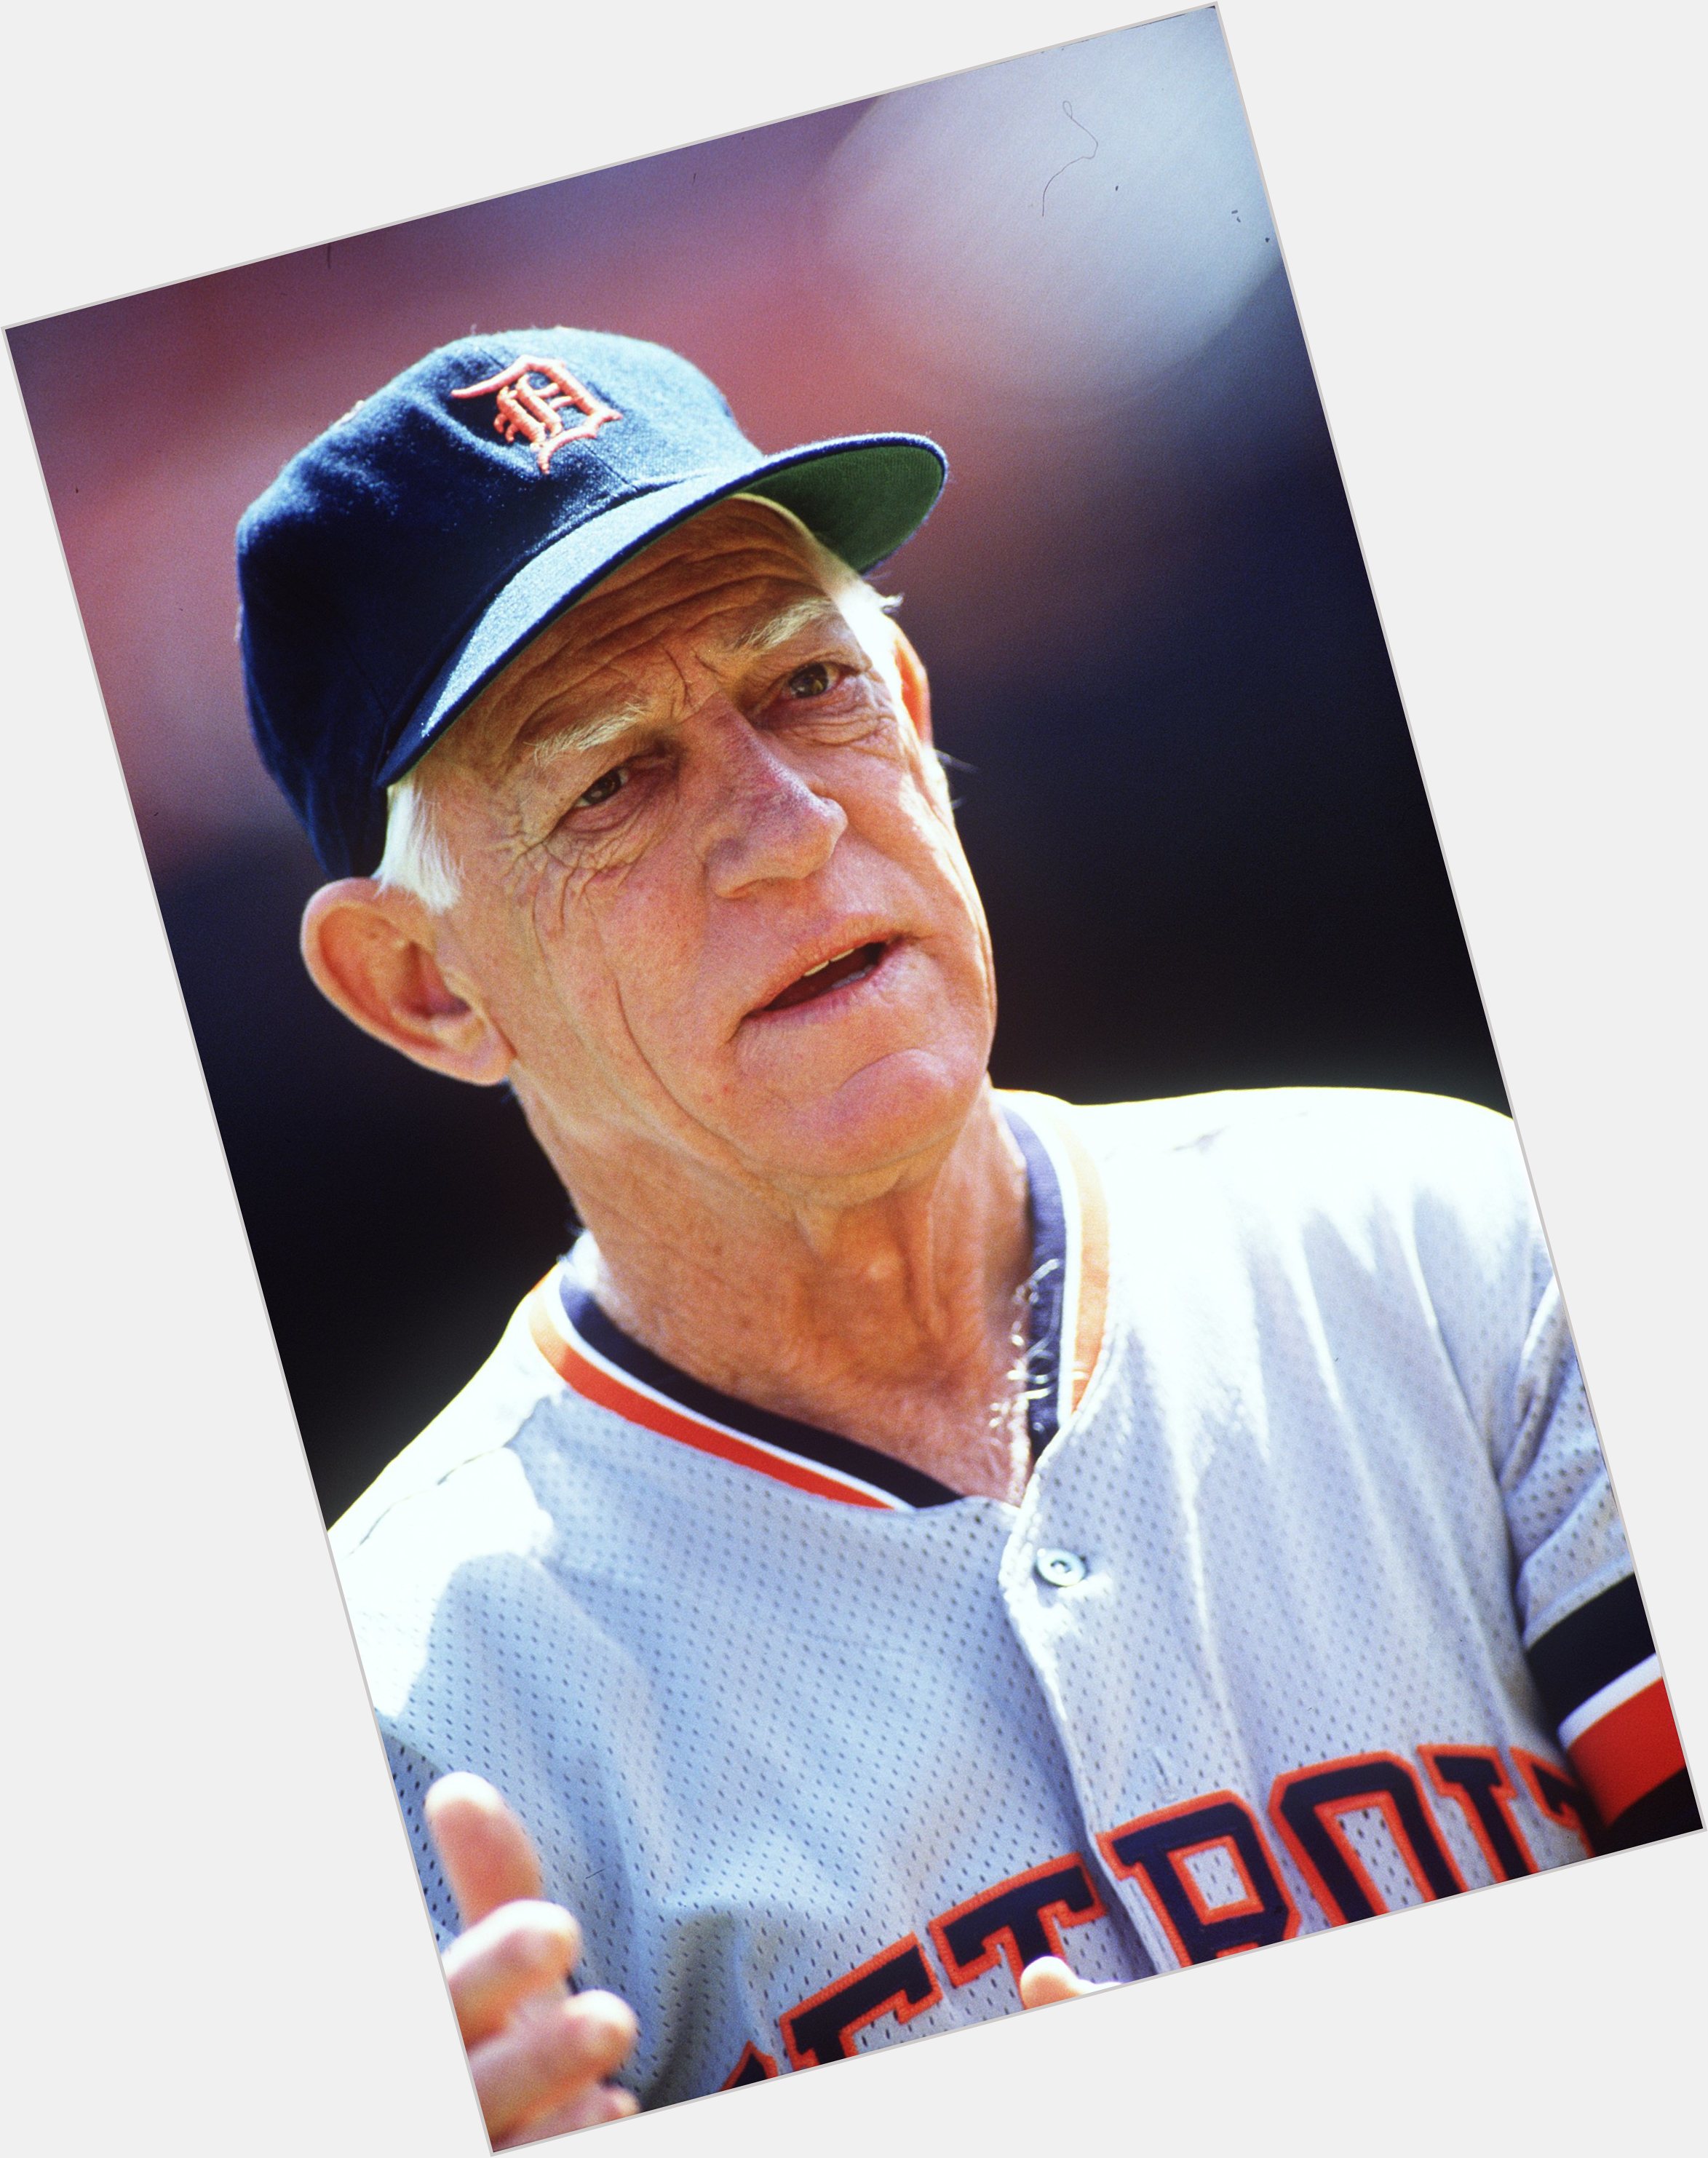 Https://fanpagepress.net/m/S/Sparky Anderson Sexy 0